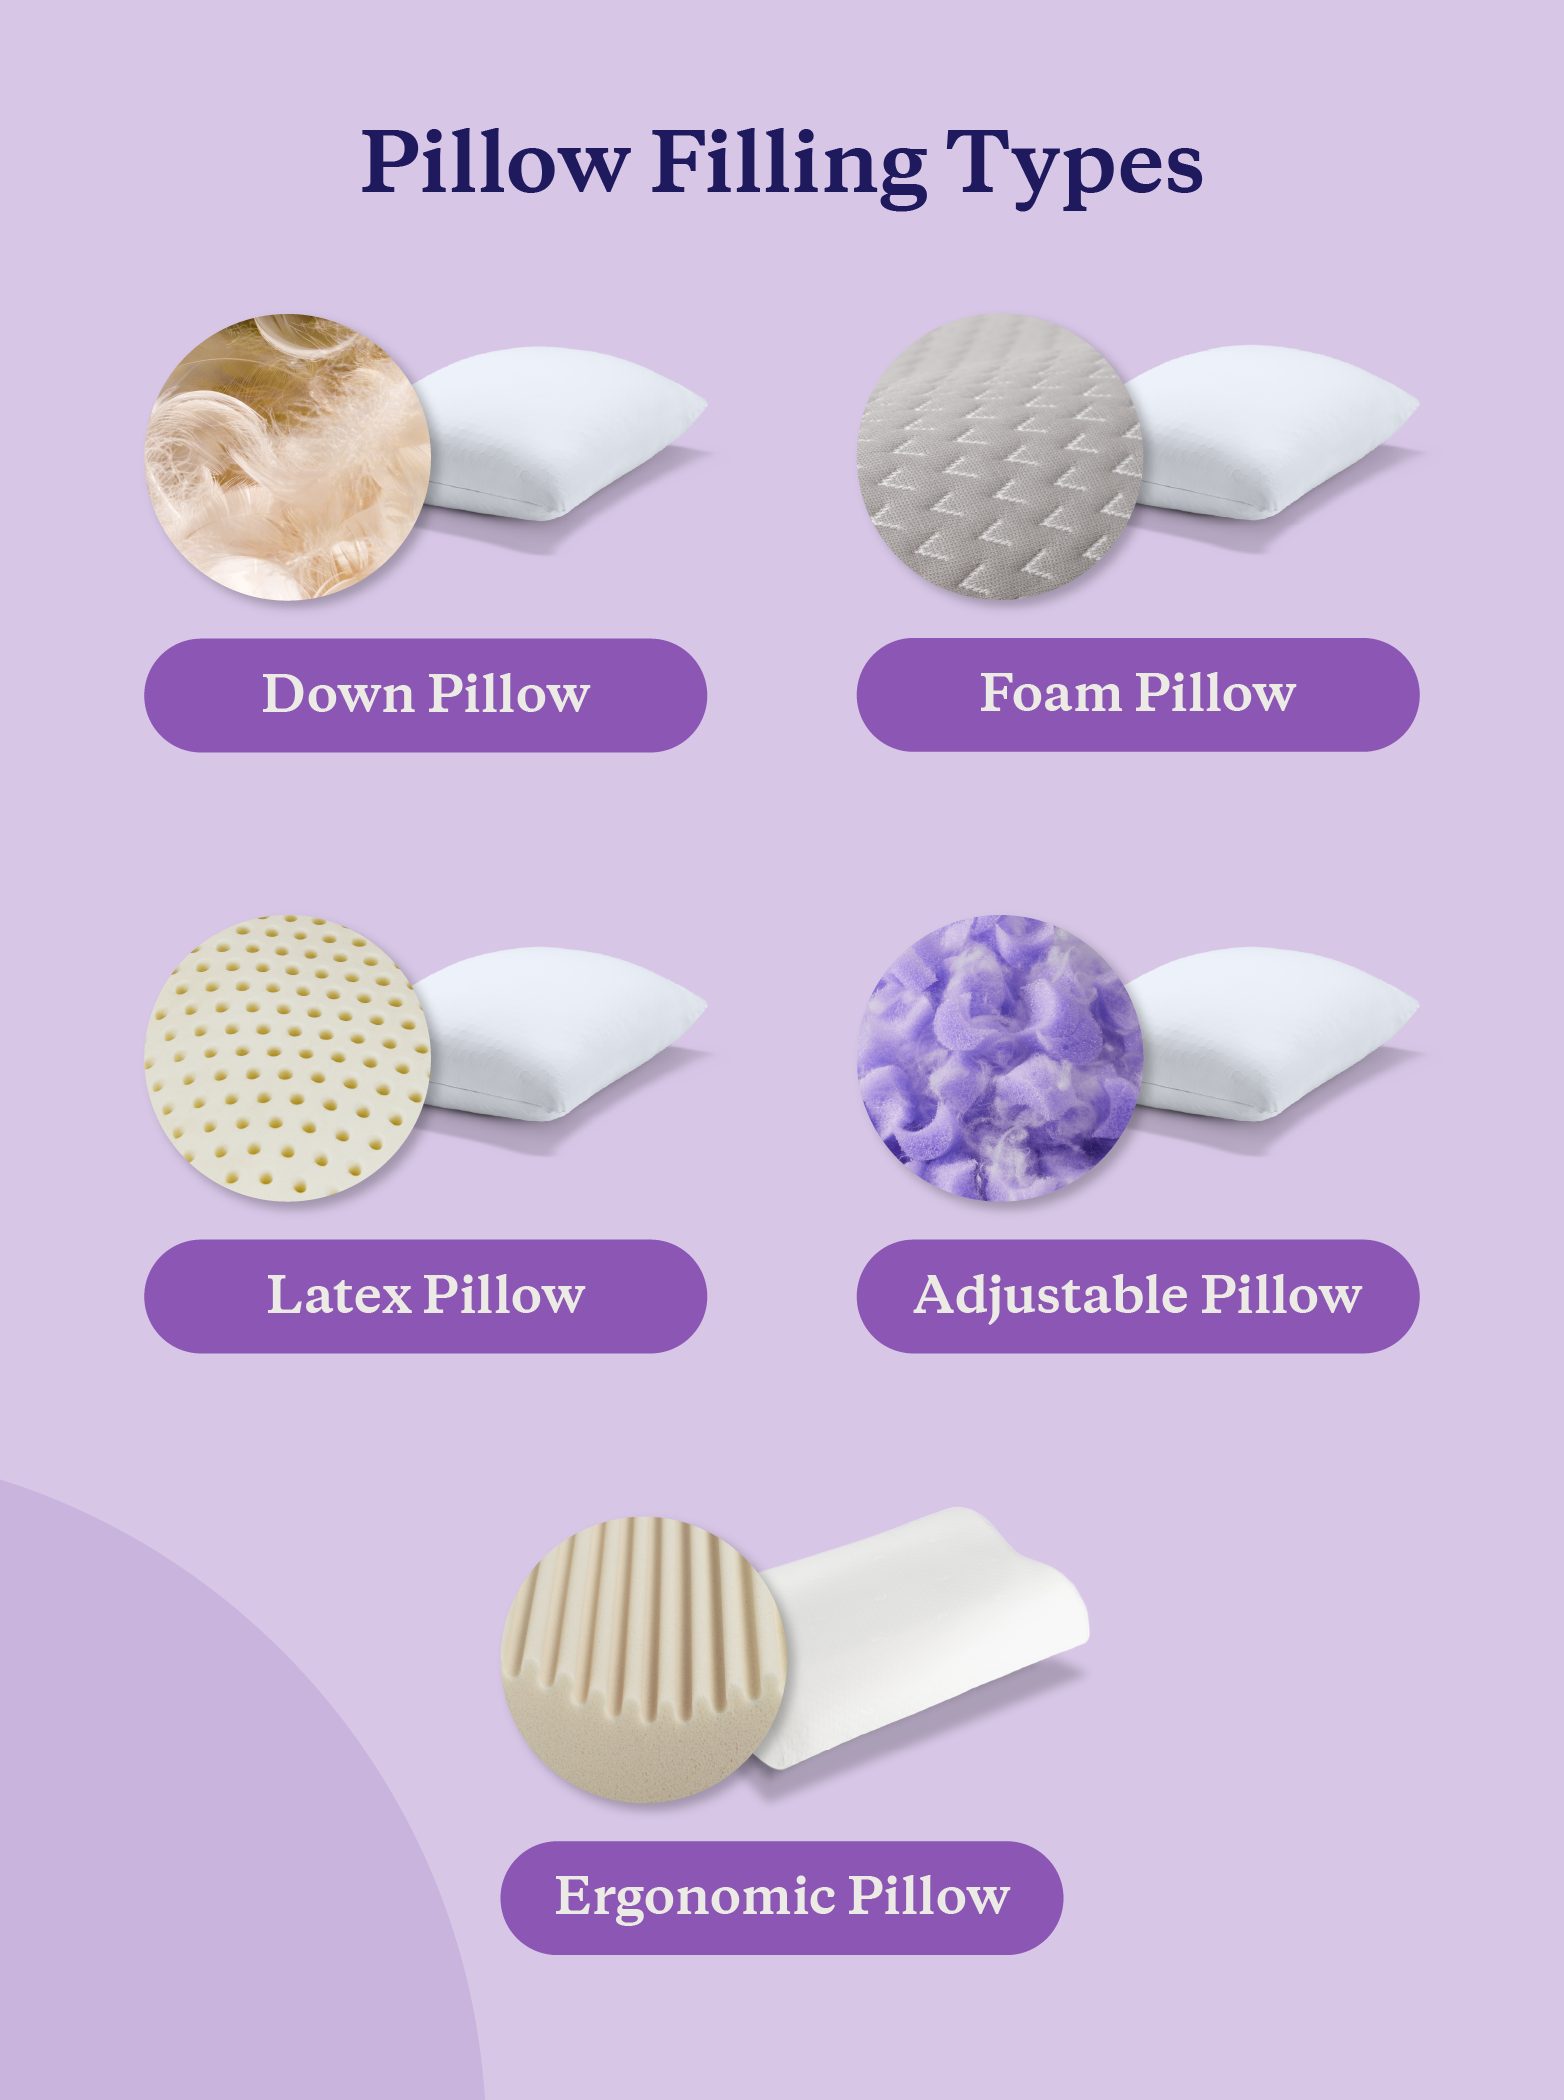 Graphic defining the different types of pillows and what they are filled with.